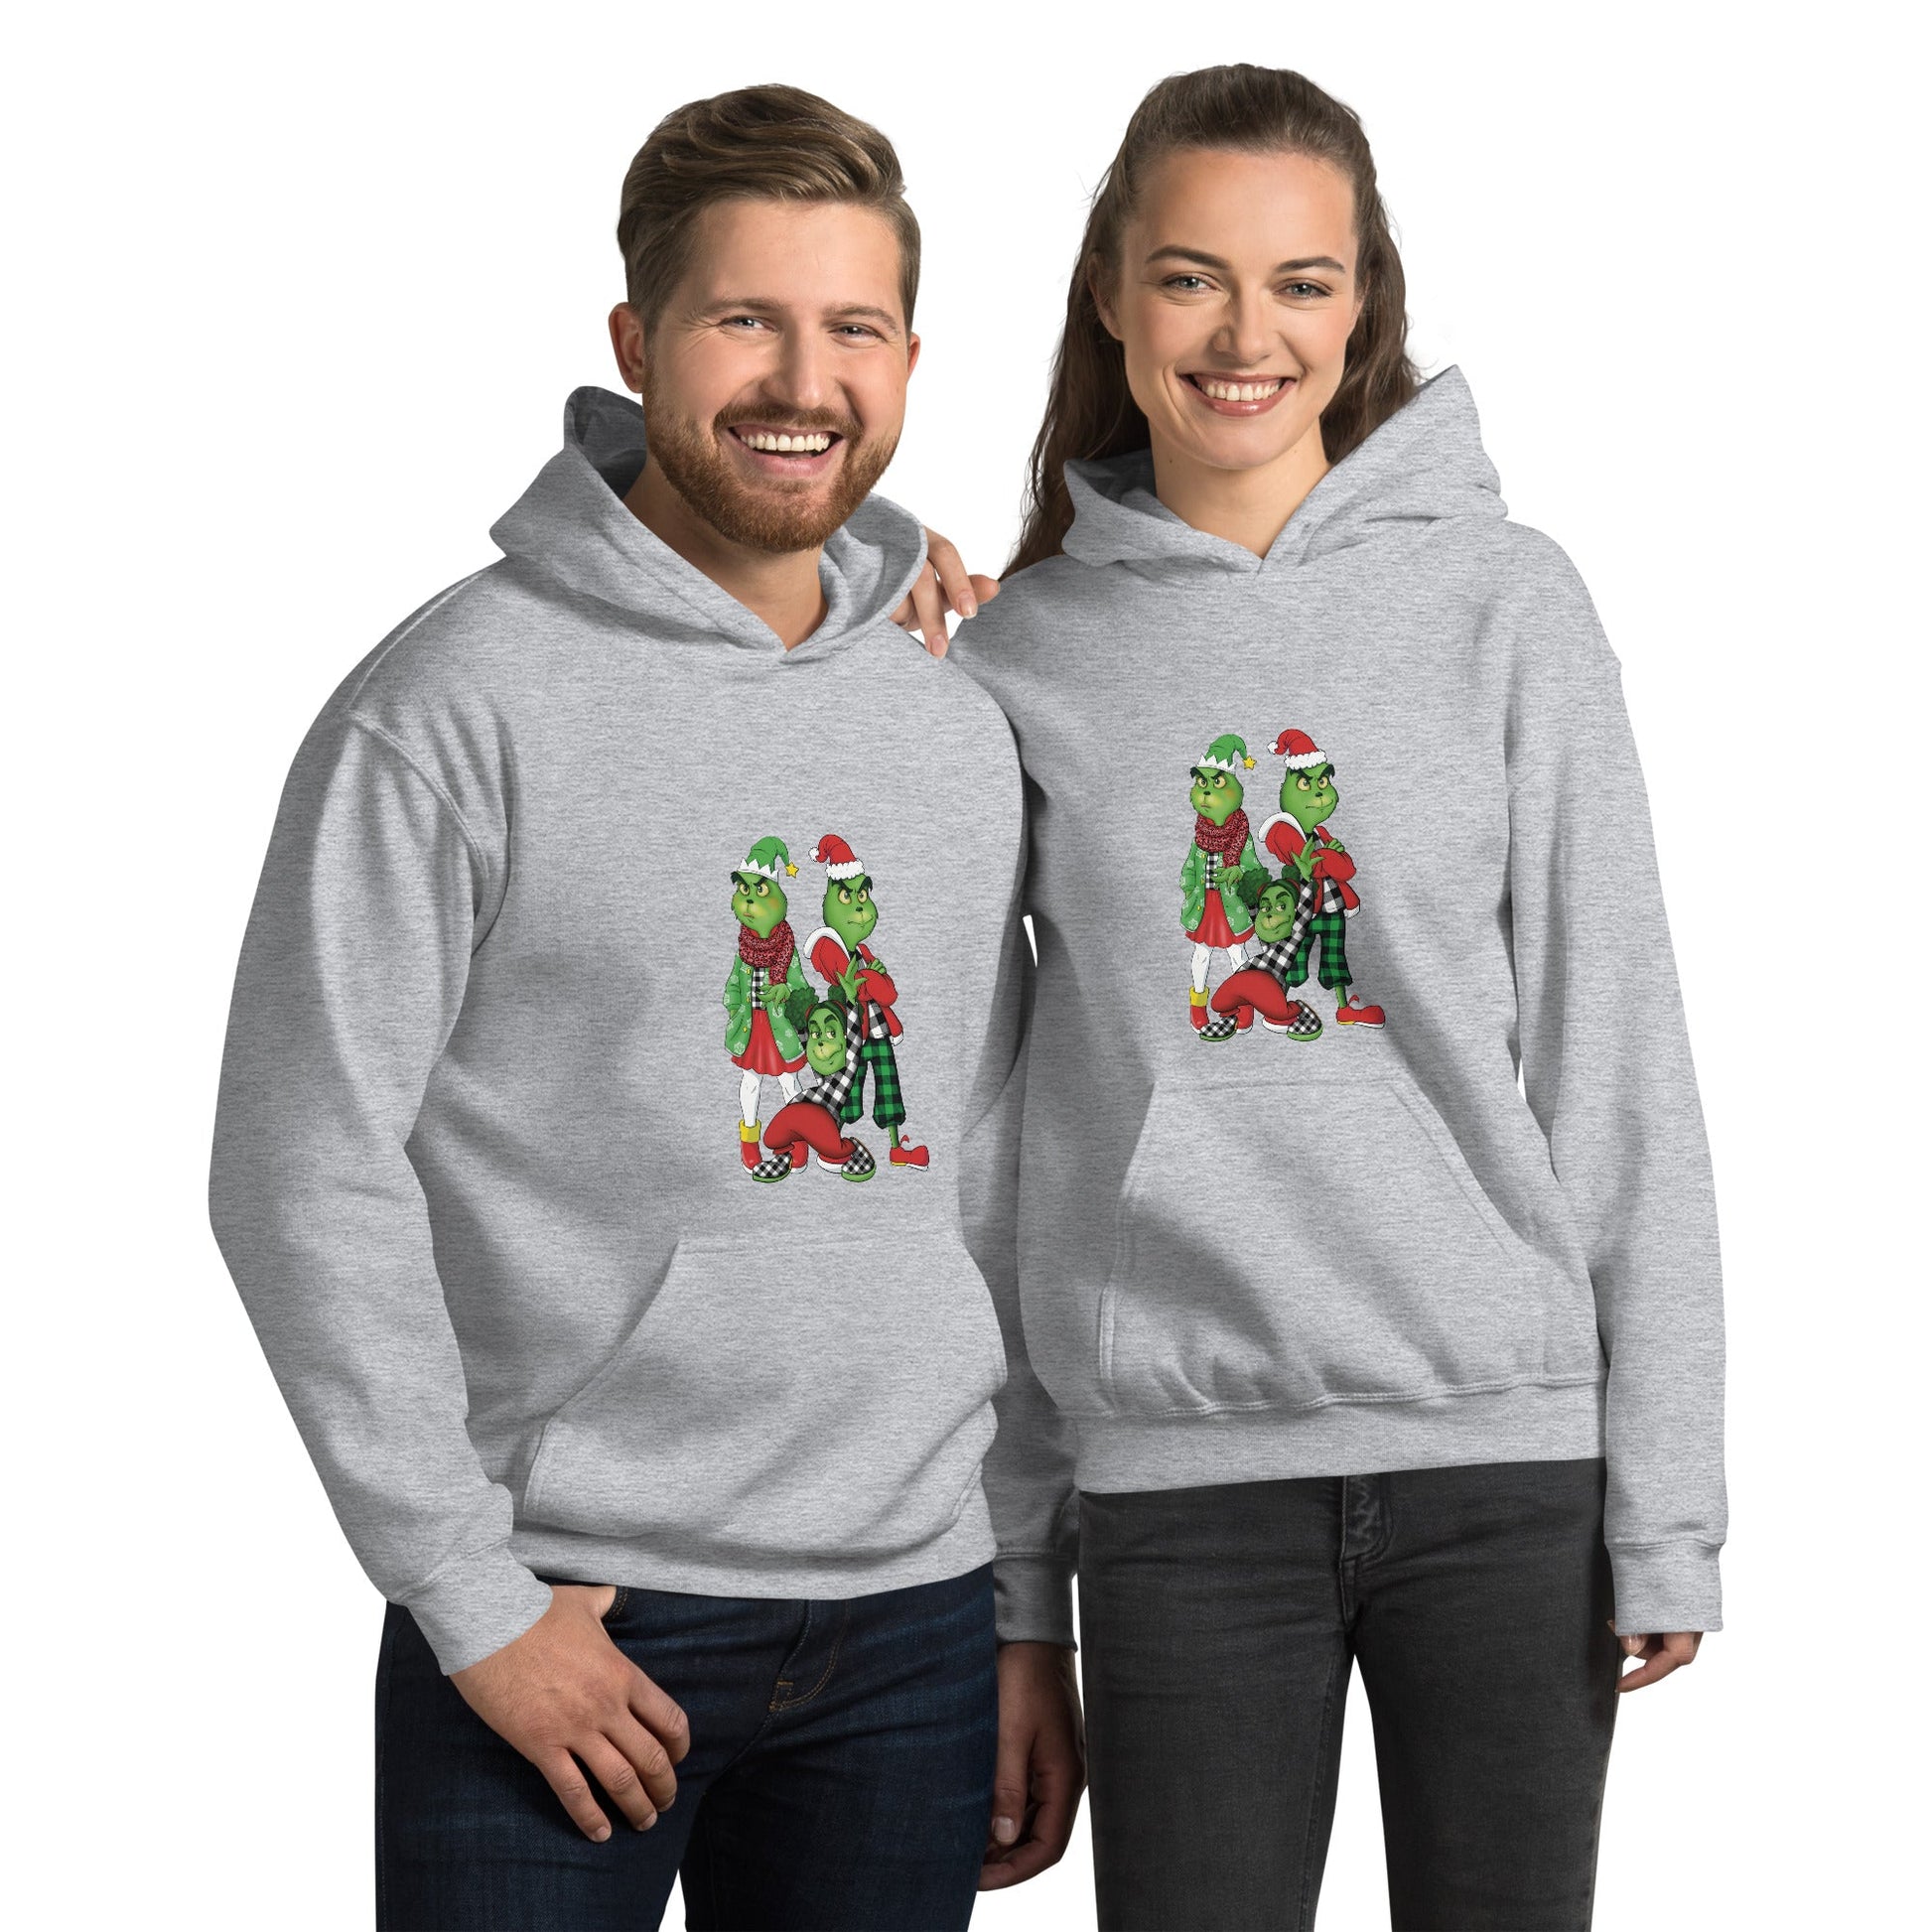 The Grinch and Family Christmas Unisex Hoodie - smuniqueshirts